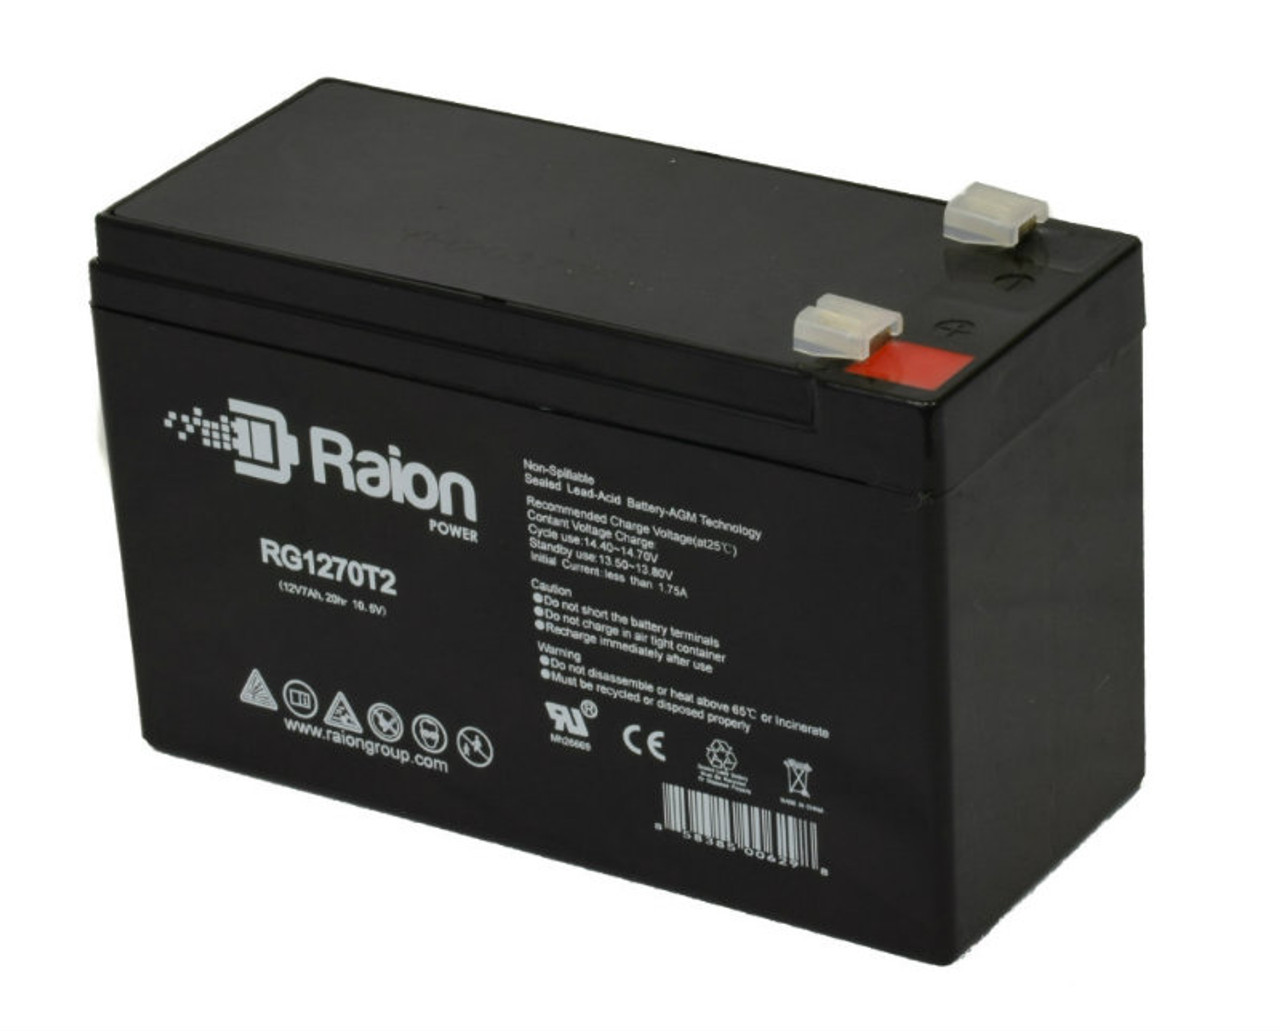 Raion Power RG1270T1 12V 7Ah Non-Spillable Replacement Battery for Aritech Battery BS326